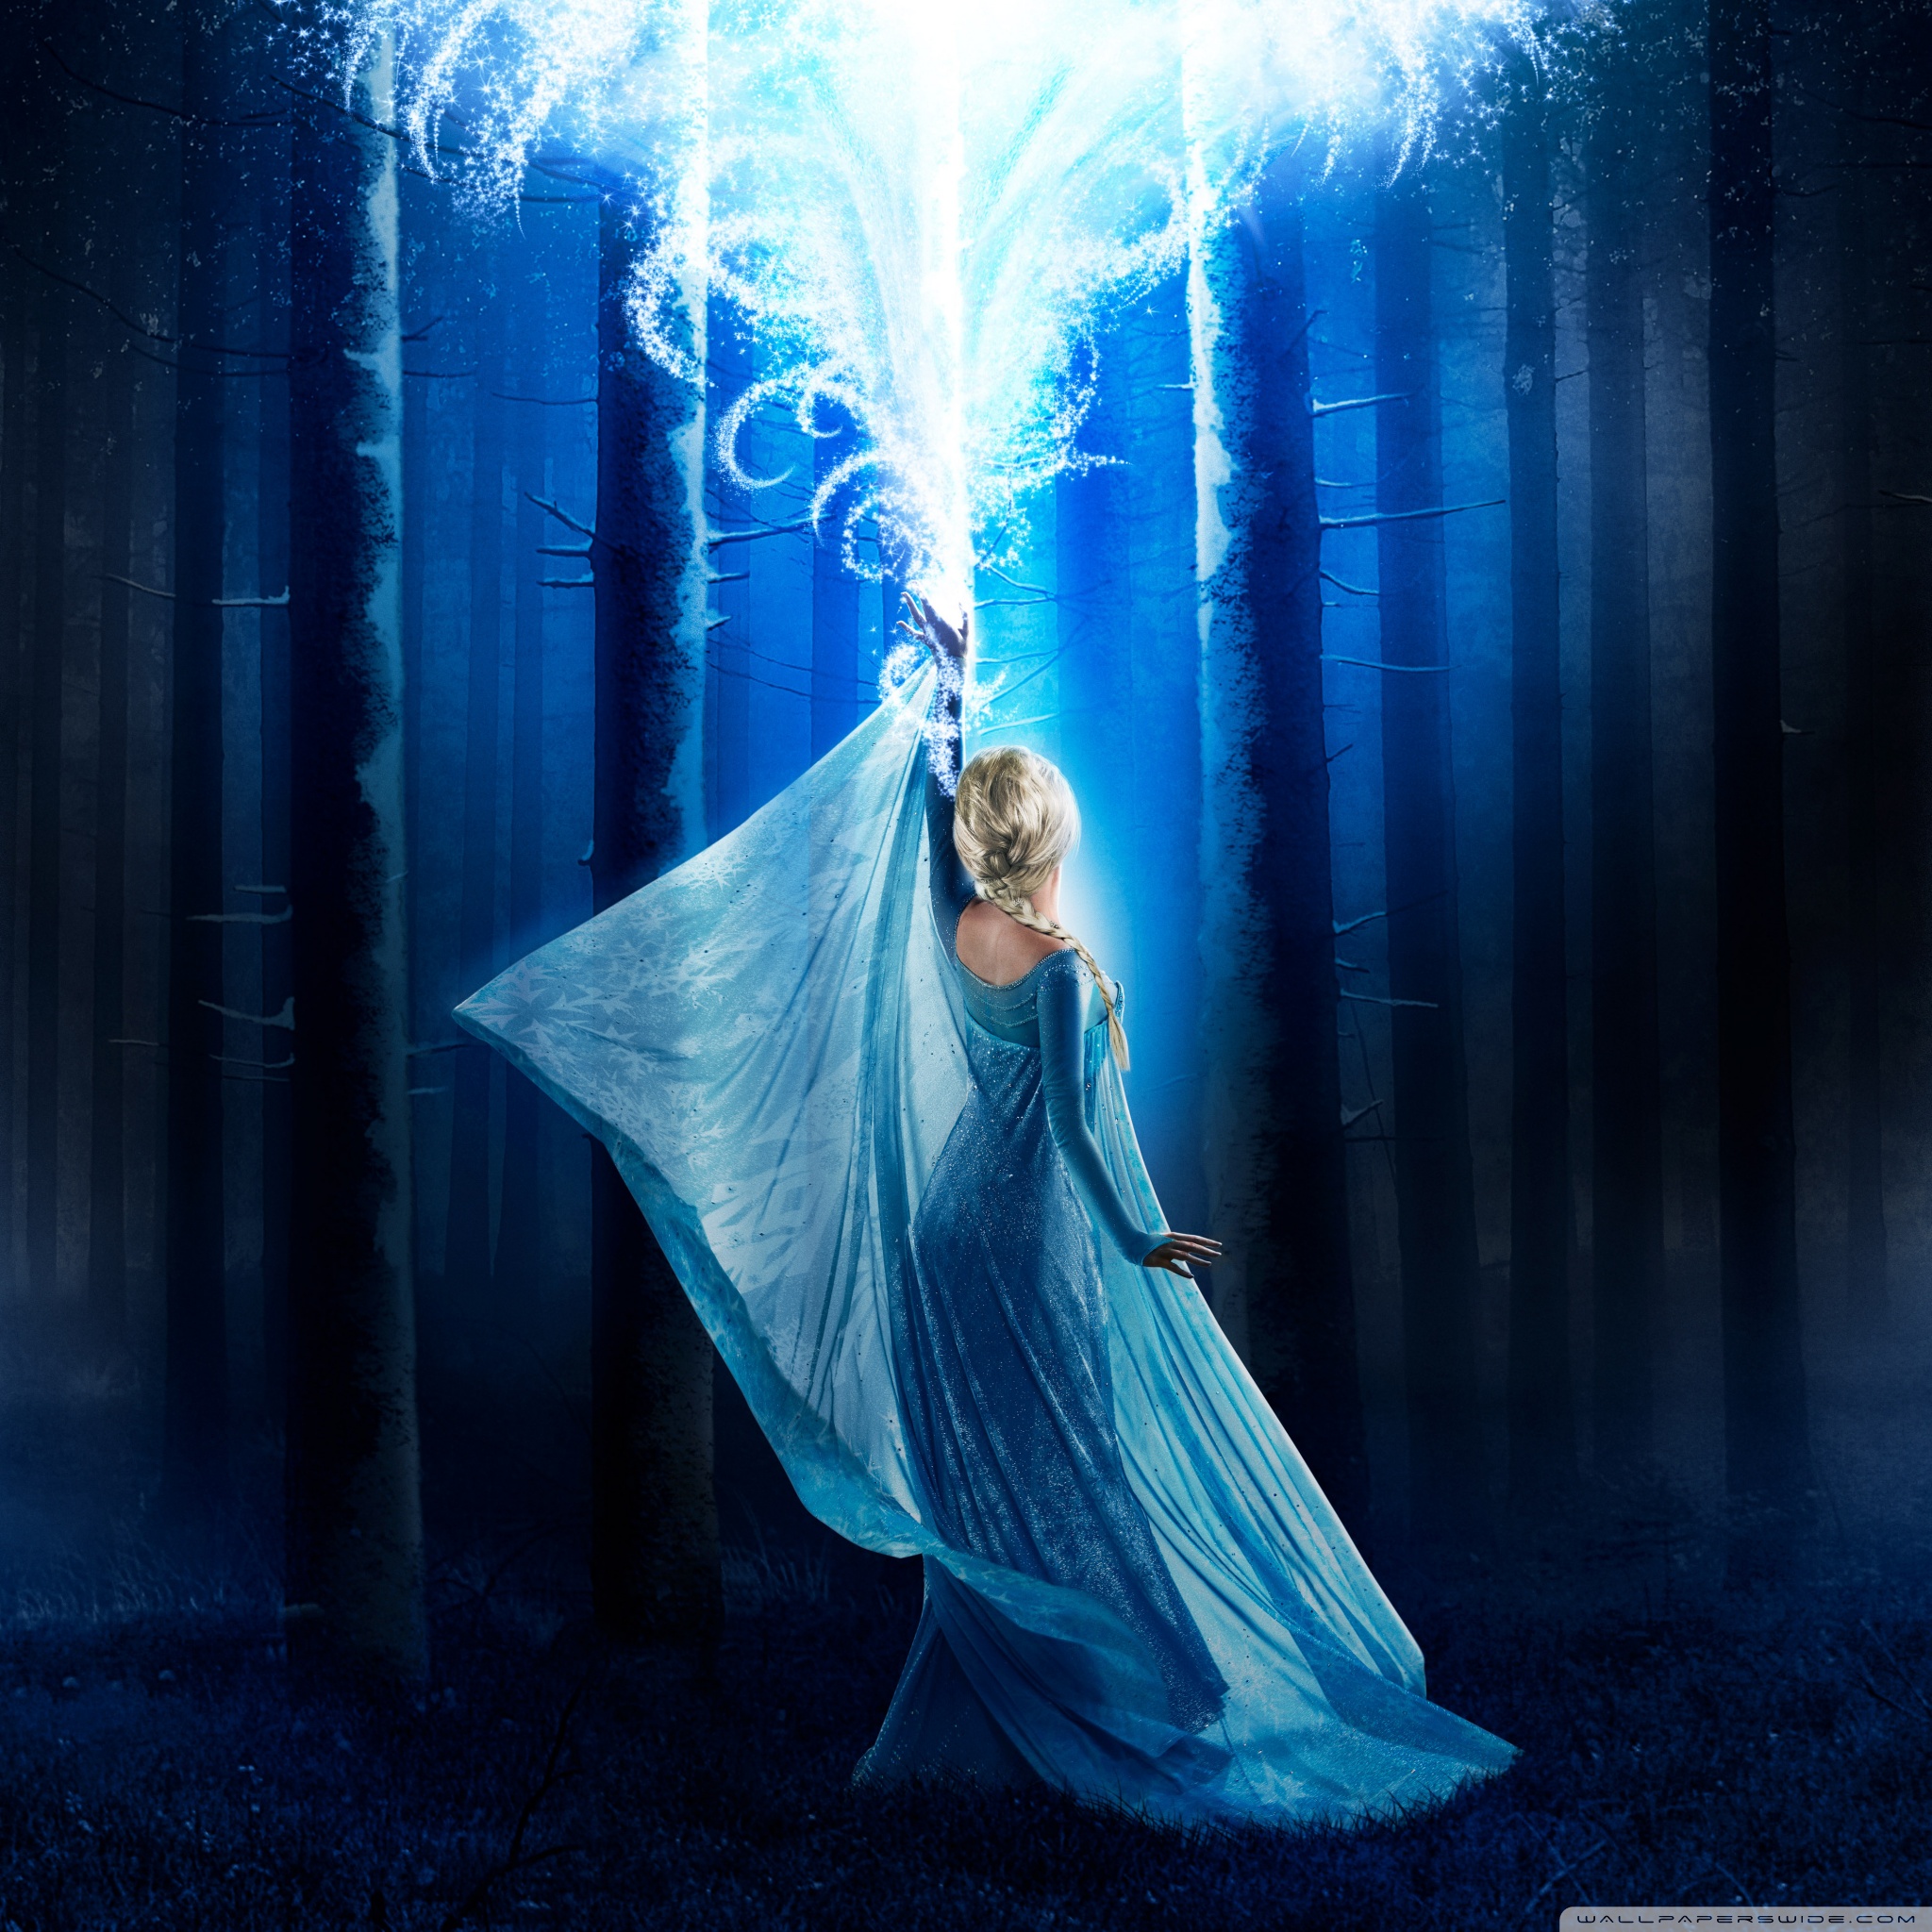 once upon a time wallpaper hd,blue,cg artwork,darkness,fictional character,photography